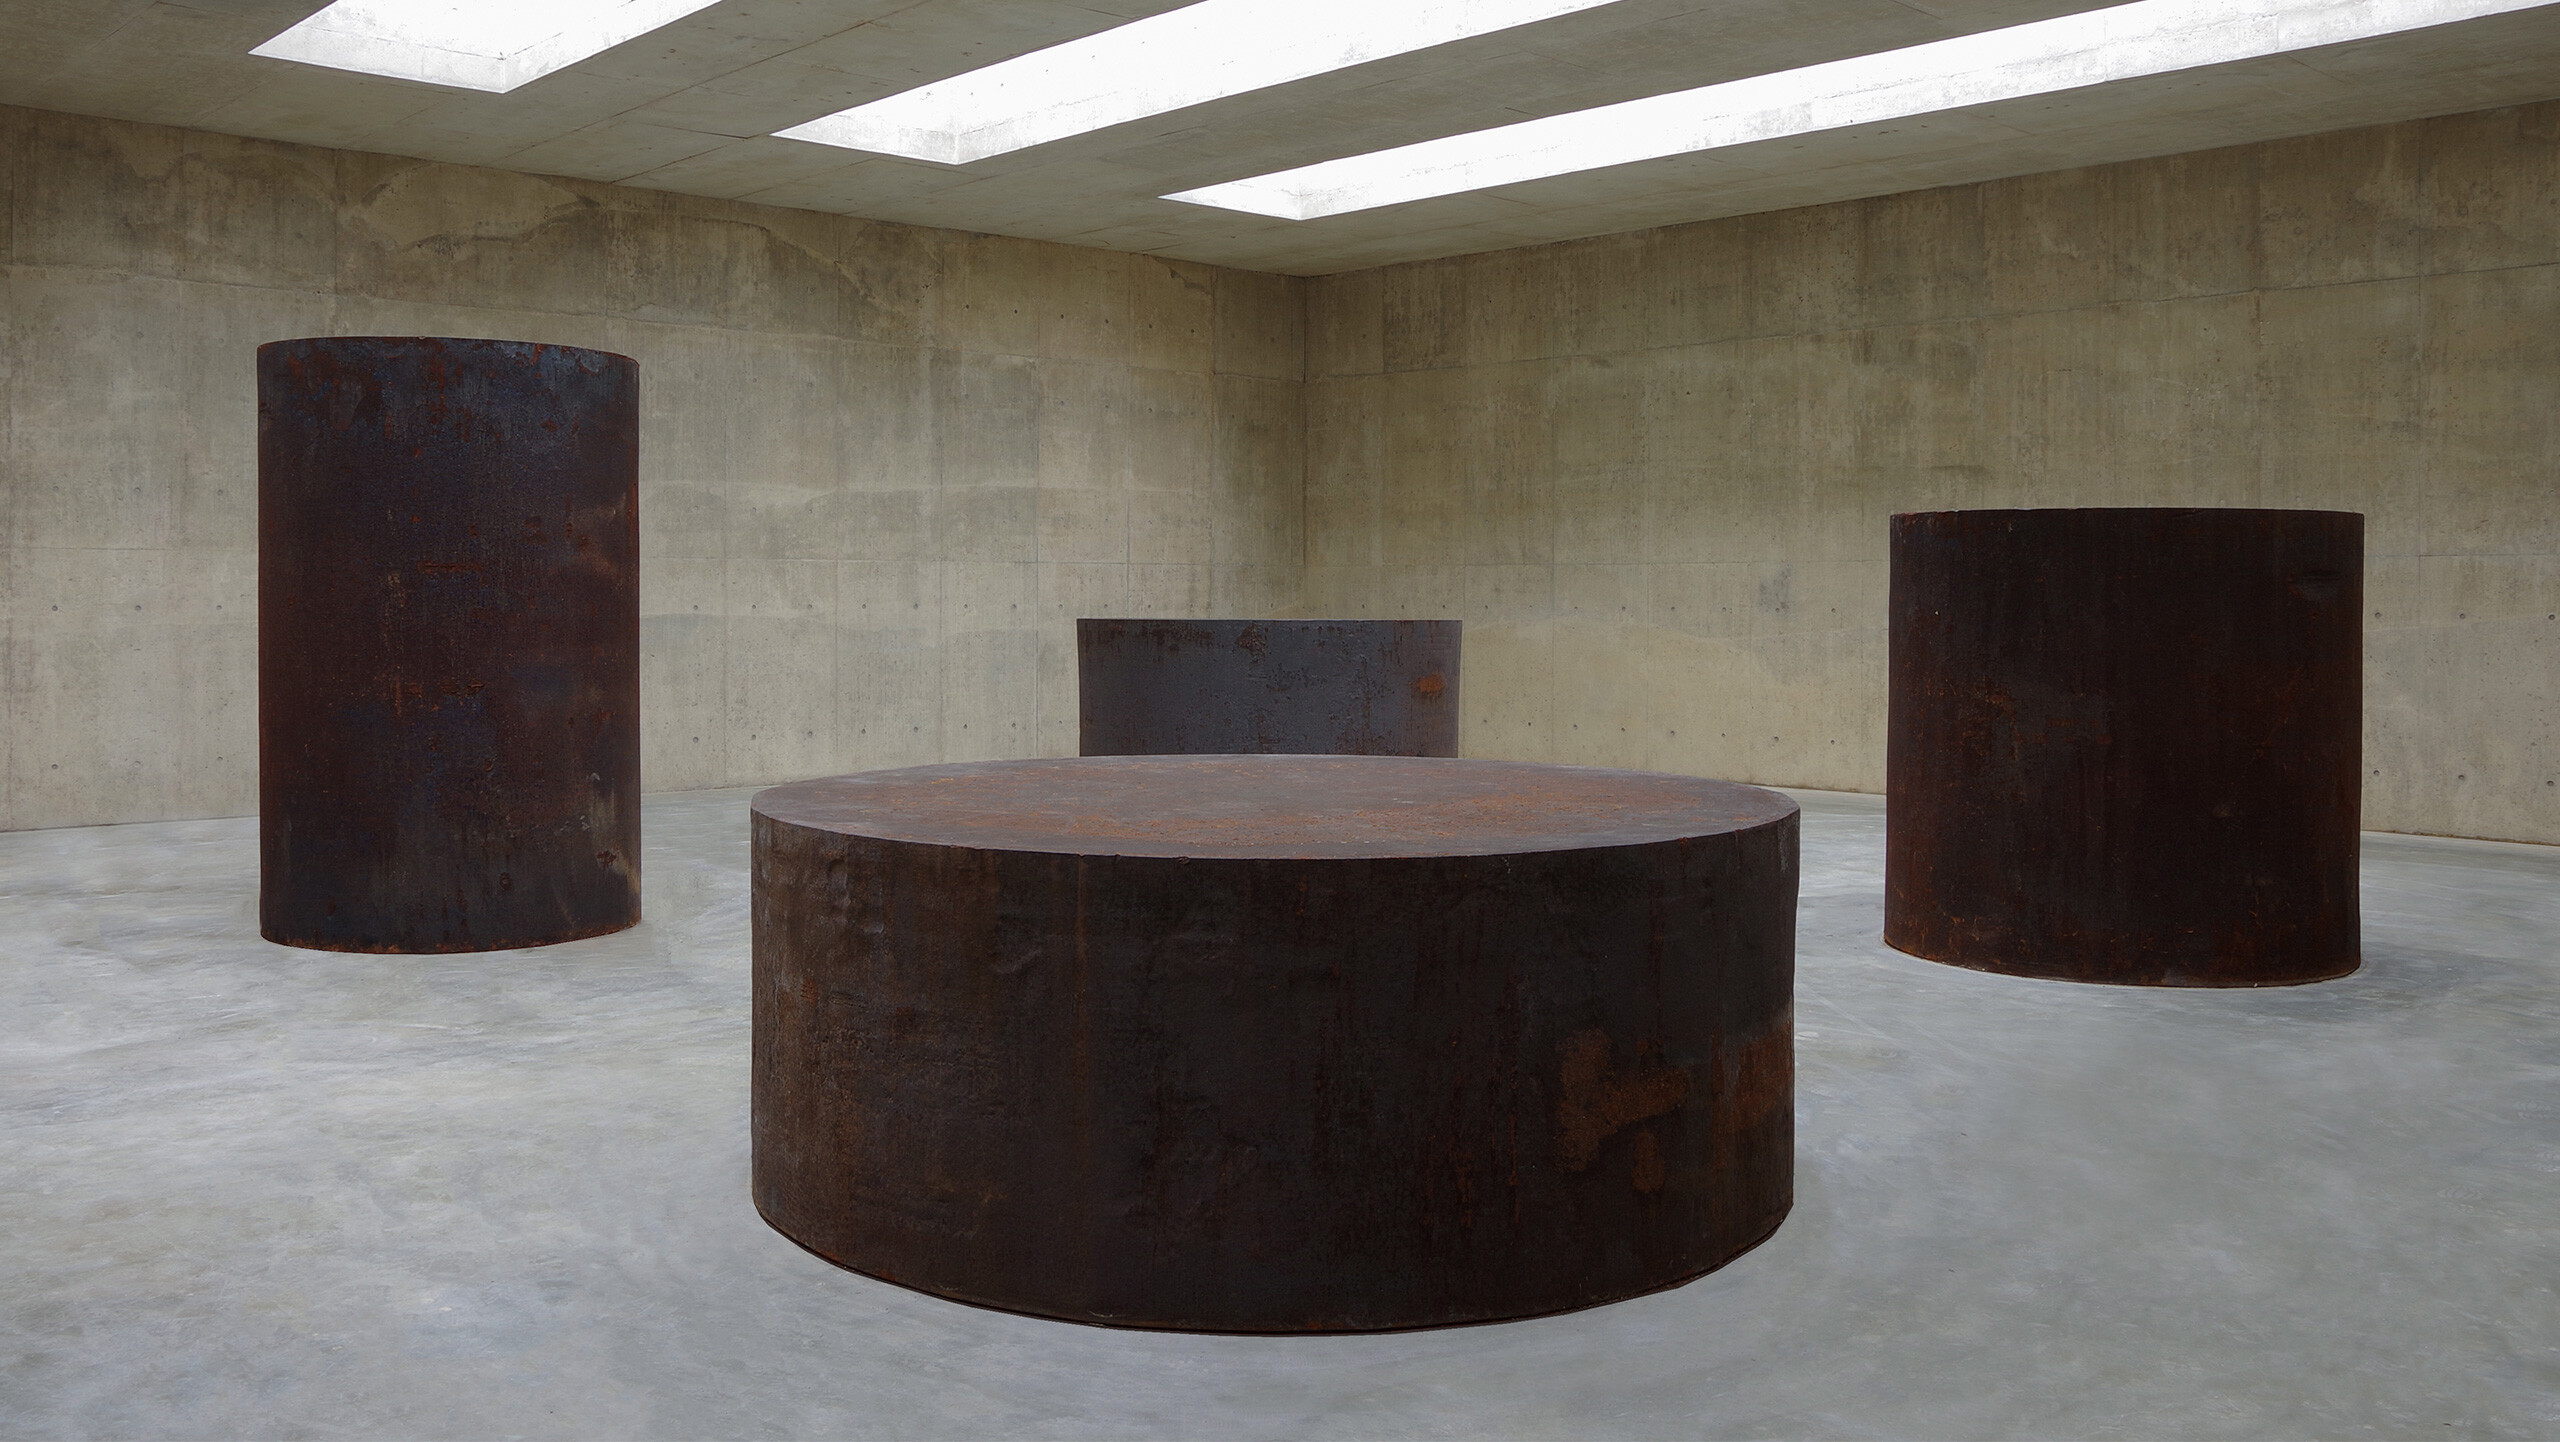 Sculptures by Richard Serra, titled Four Rounds: Equal Weight, Unequal Measure, dated 2017.